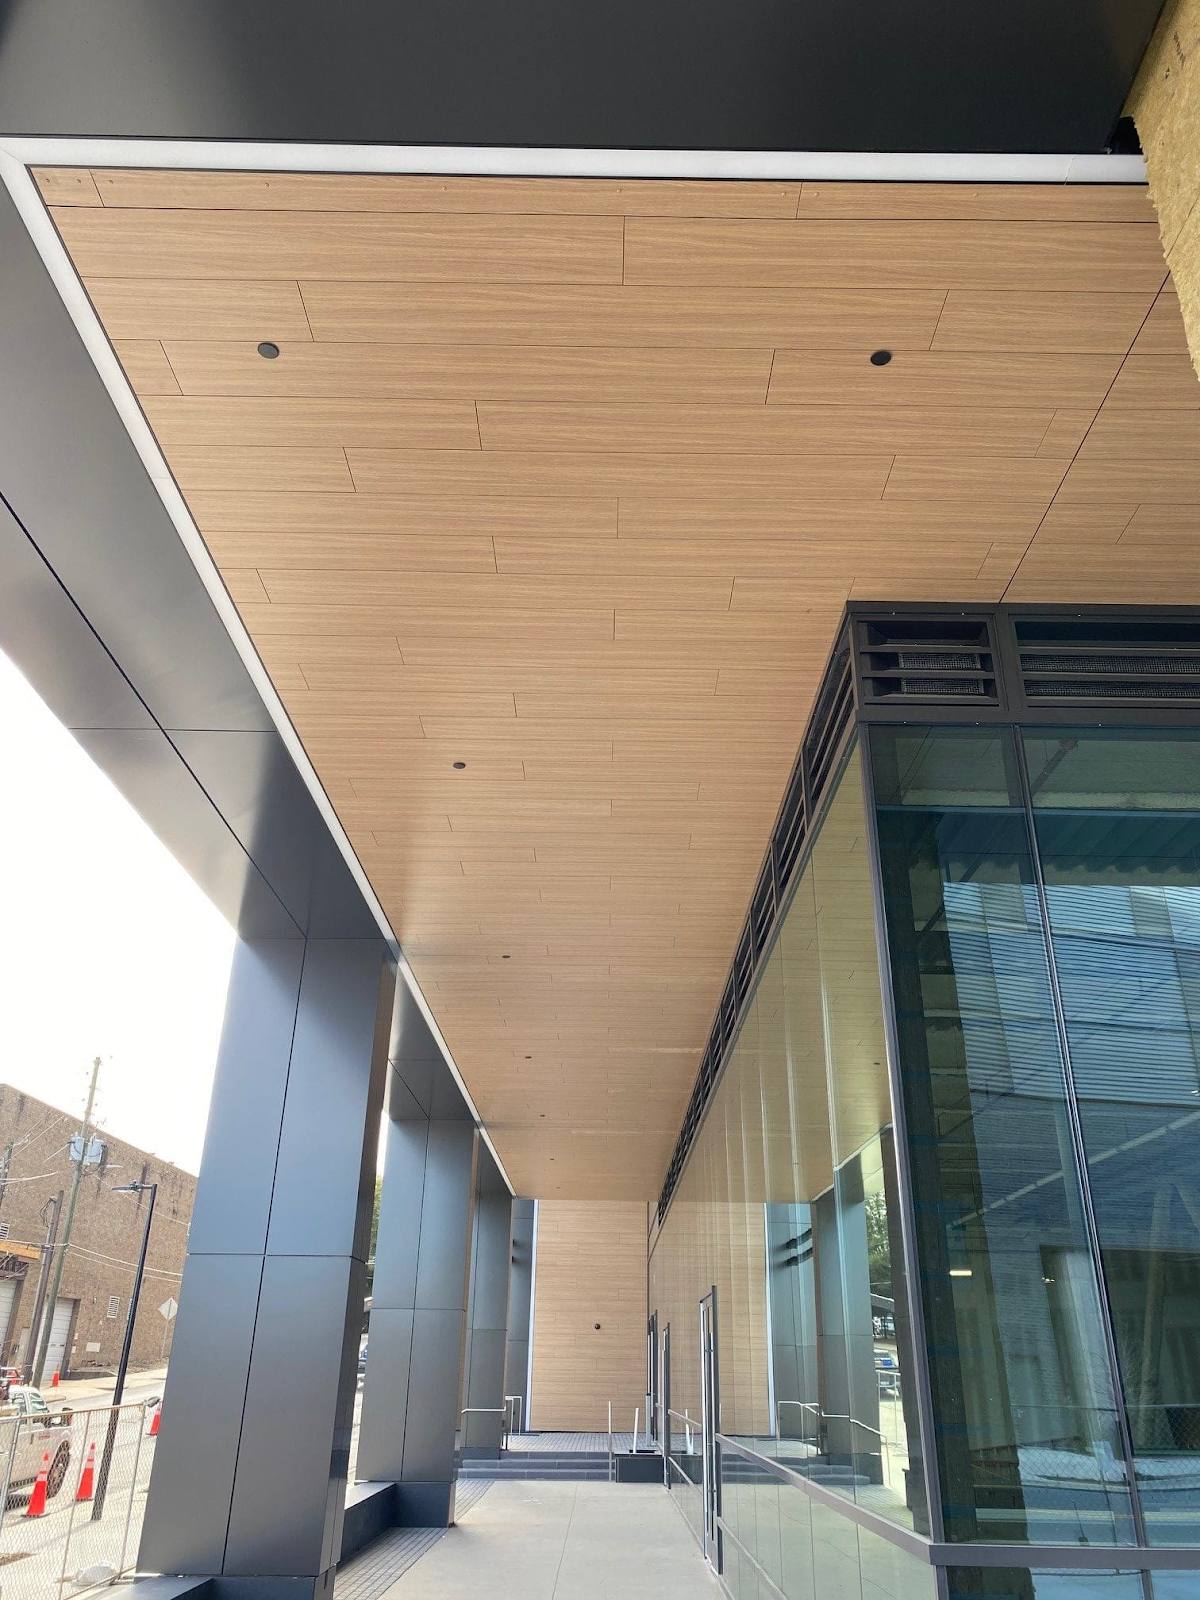 Fundermax phenolic panels as soffits paired with metal panels.